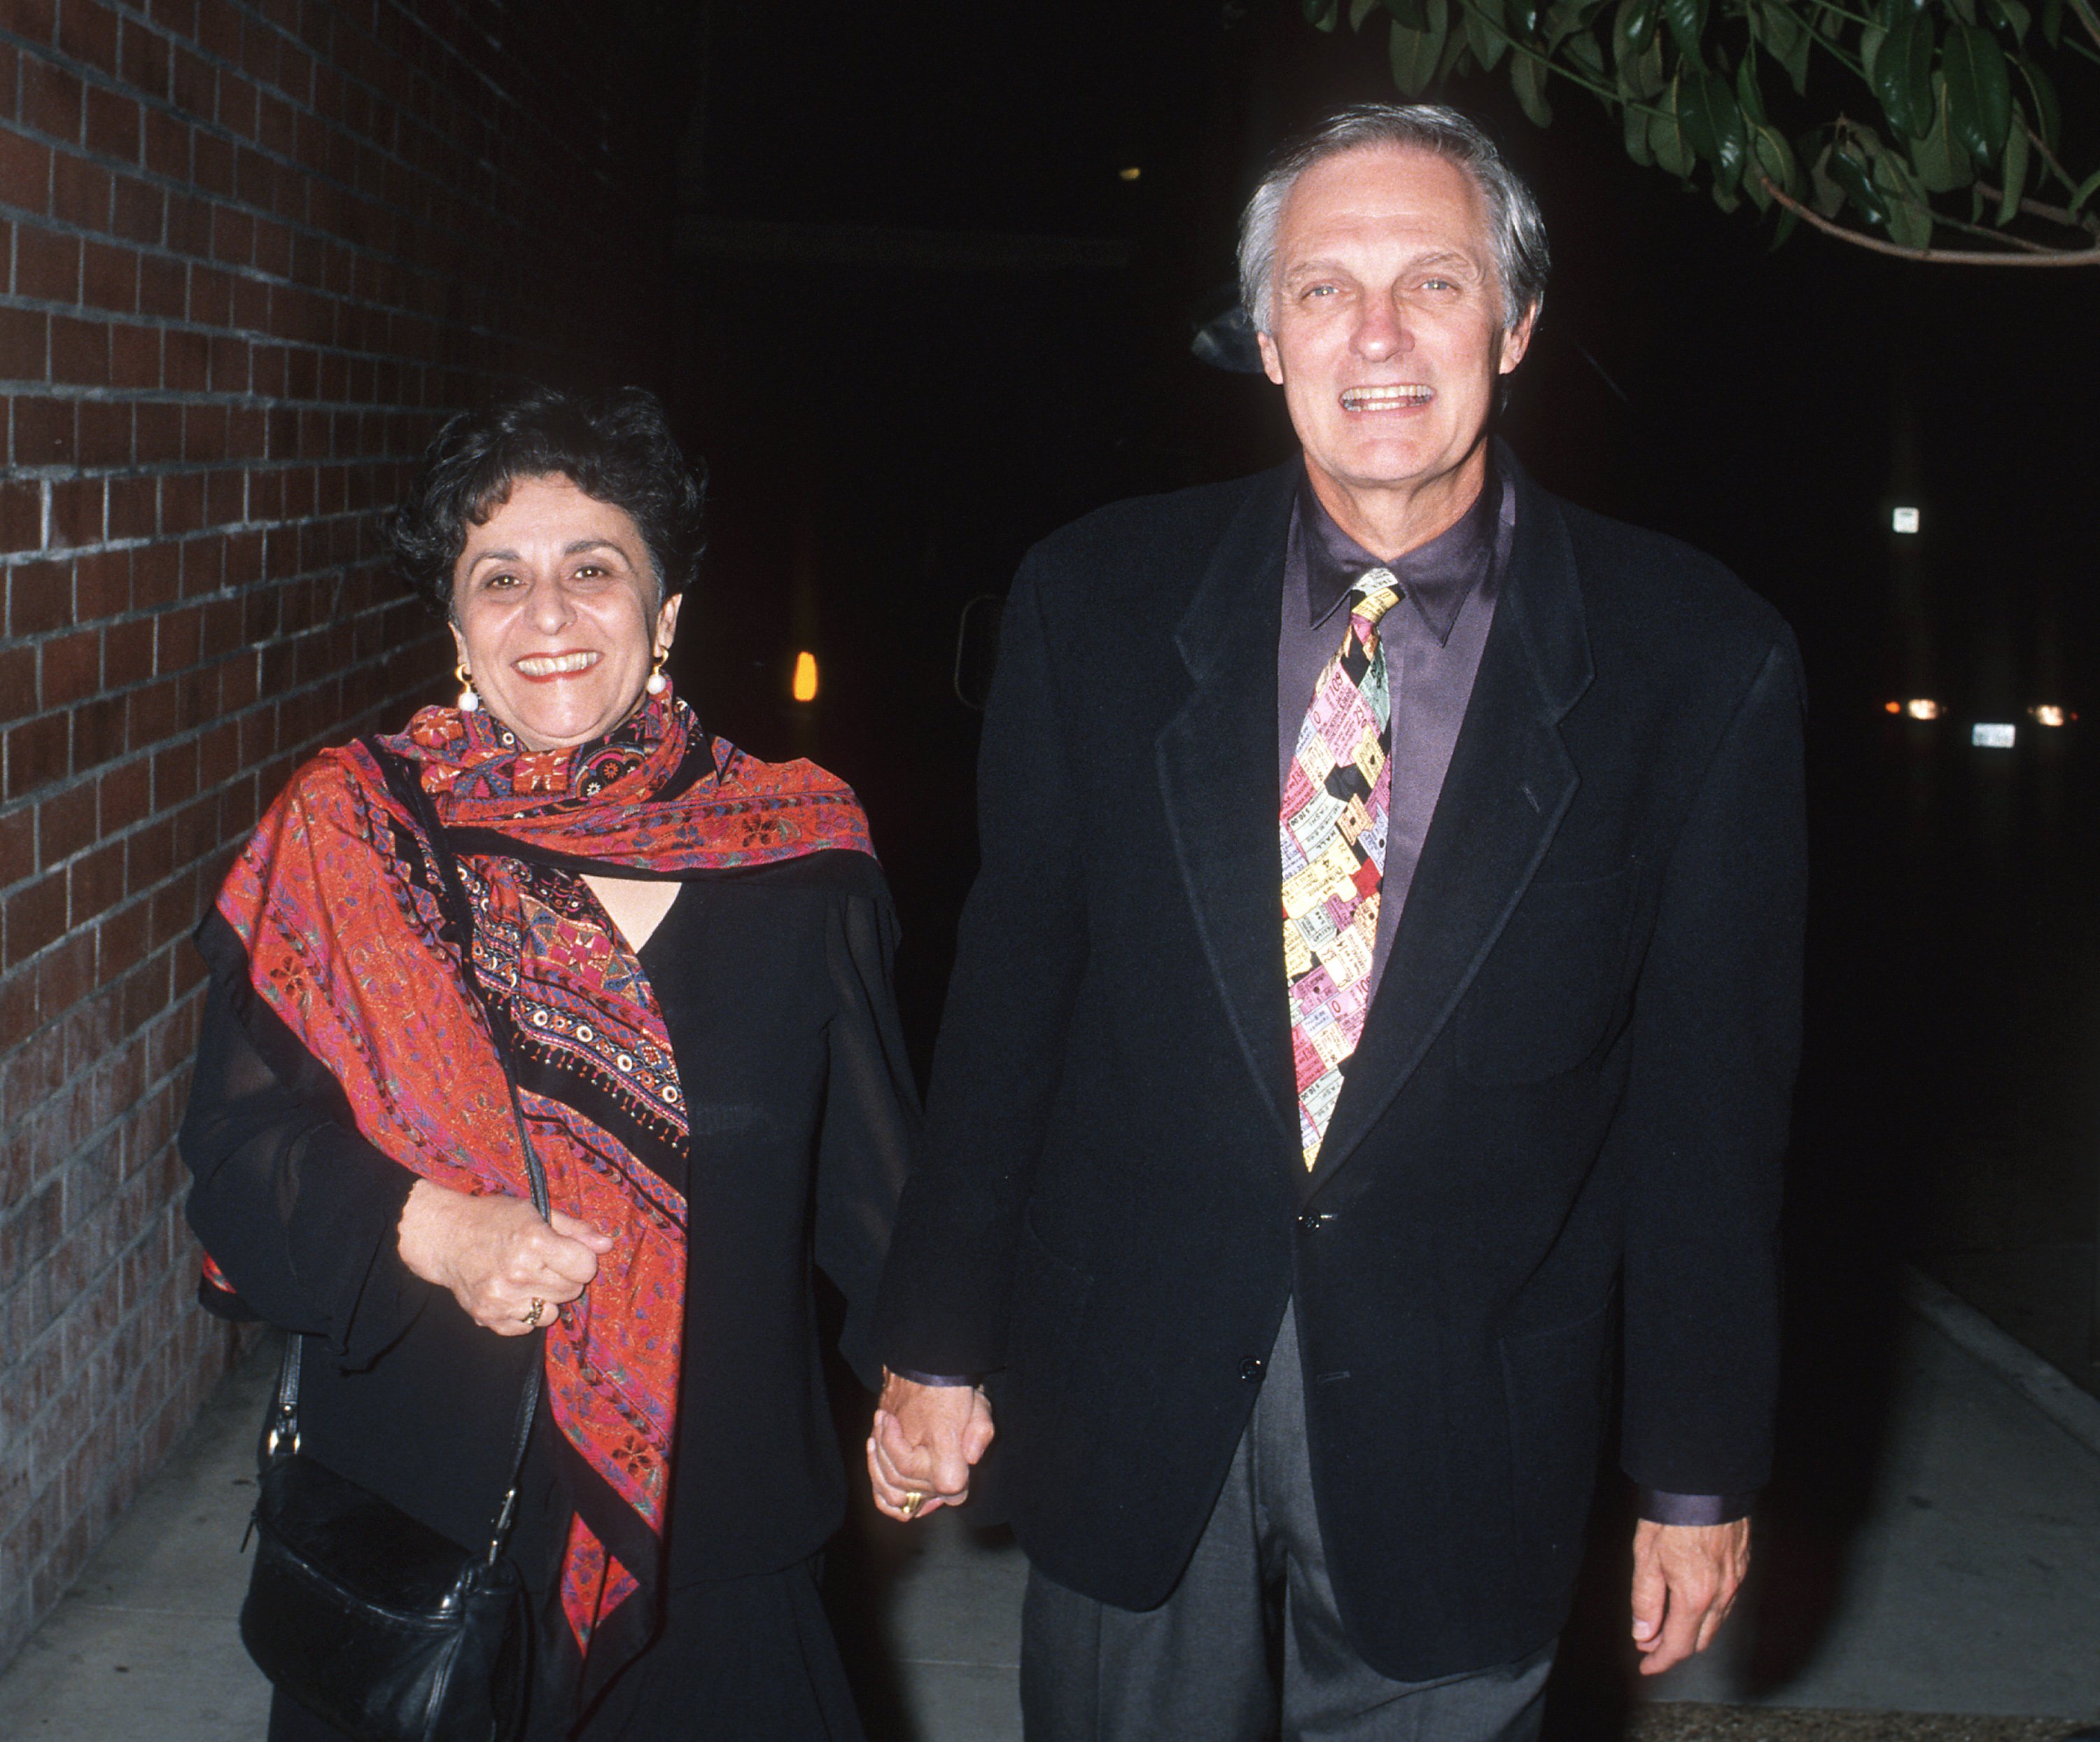 Arlene Alda and Alan Alda during Post Opening Night Party for "Jake's Women" at Columbia Bar & Grill on April 15, 1993 in Hollywood, California ┃Source: Getty Images